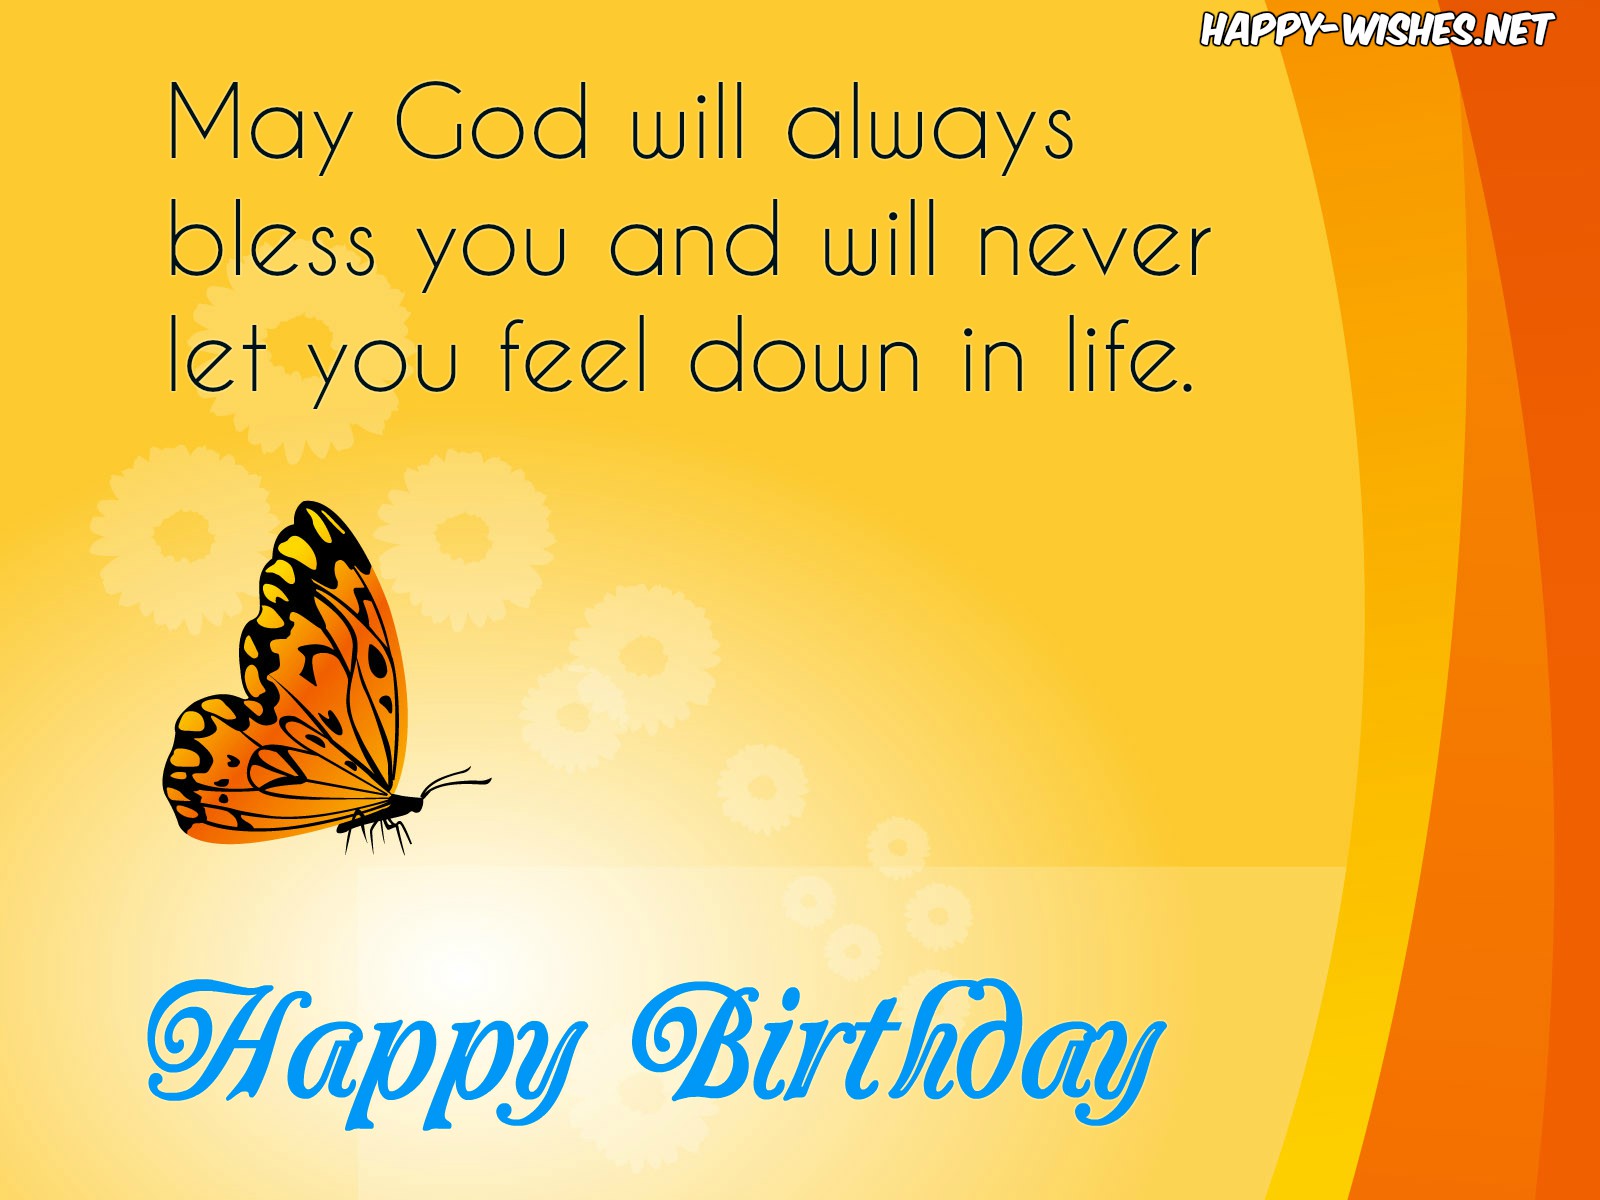 Happy Birthday Wishes With Butterfly Images - Christian Fall Happy Birthday - HD Wallpaper 